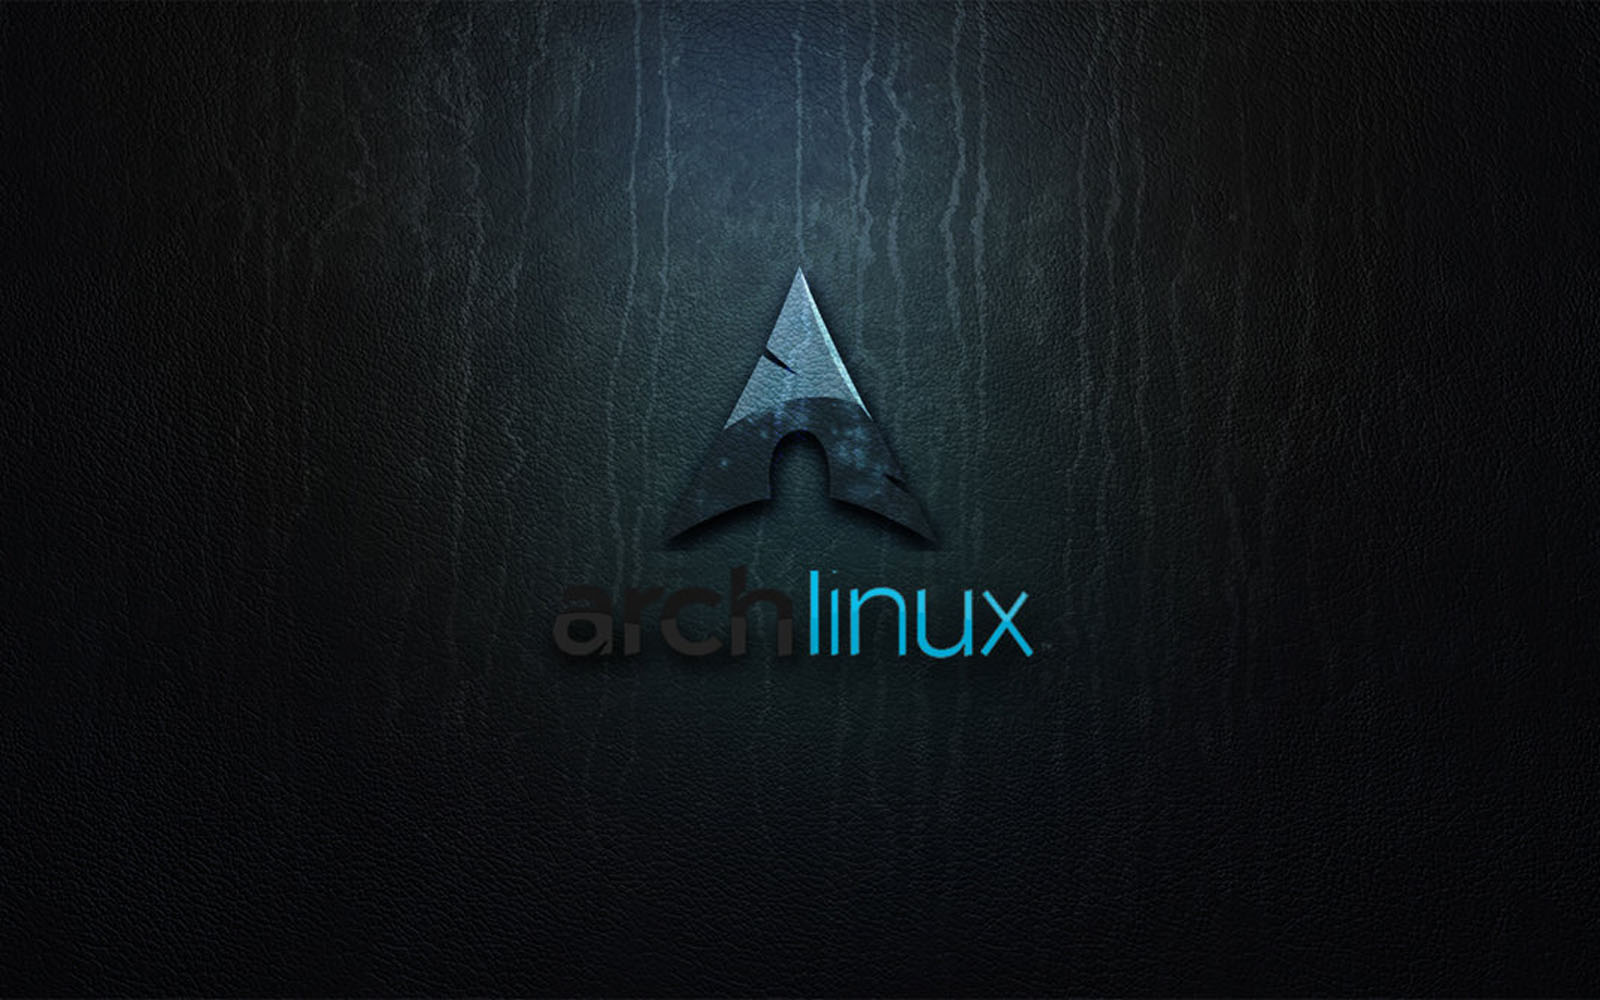 46 Arch Linux Wallpaper Hd On Wallpapersafari Images, Photos, Reviews